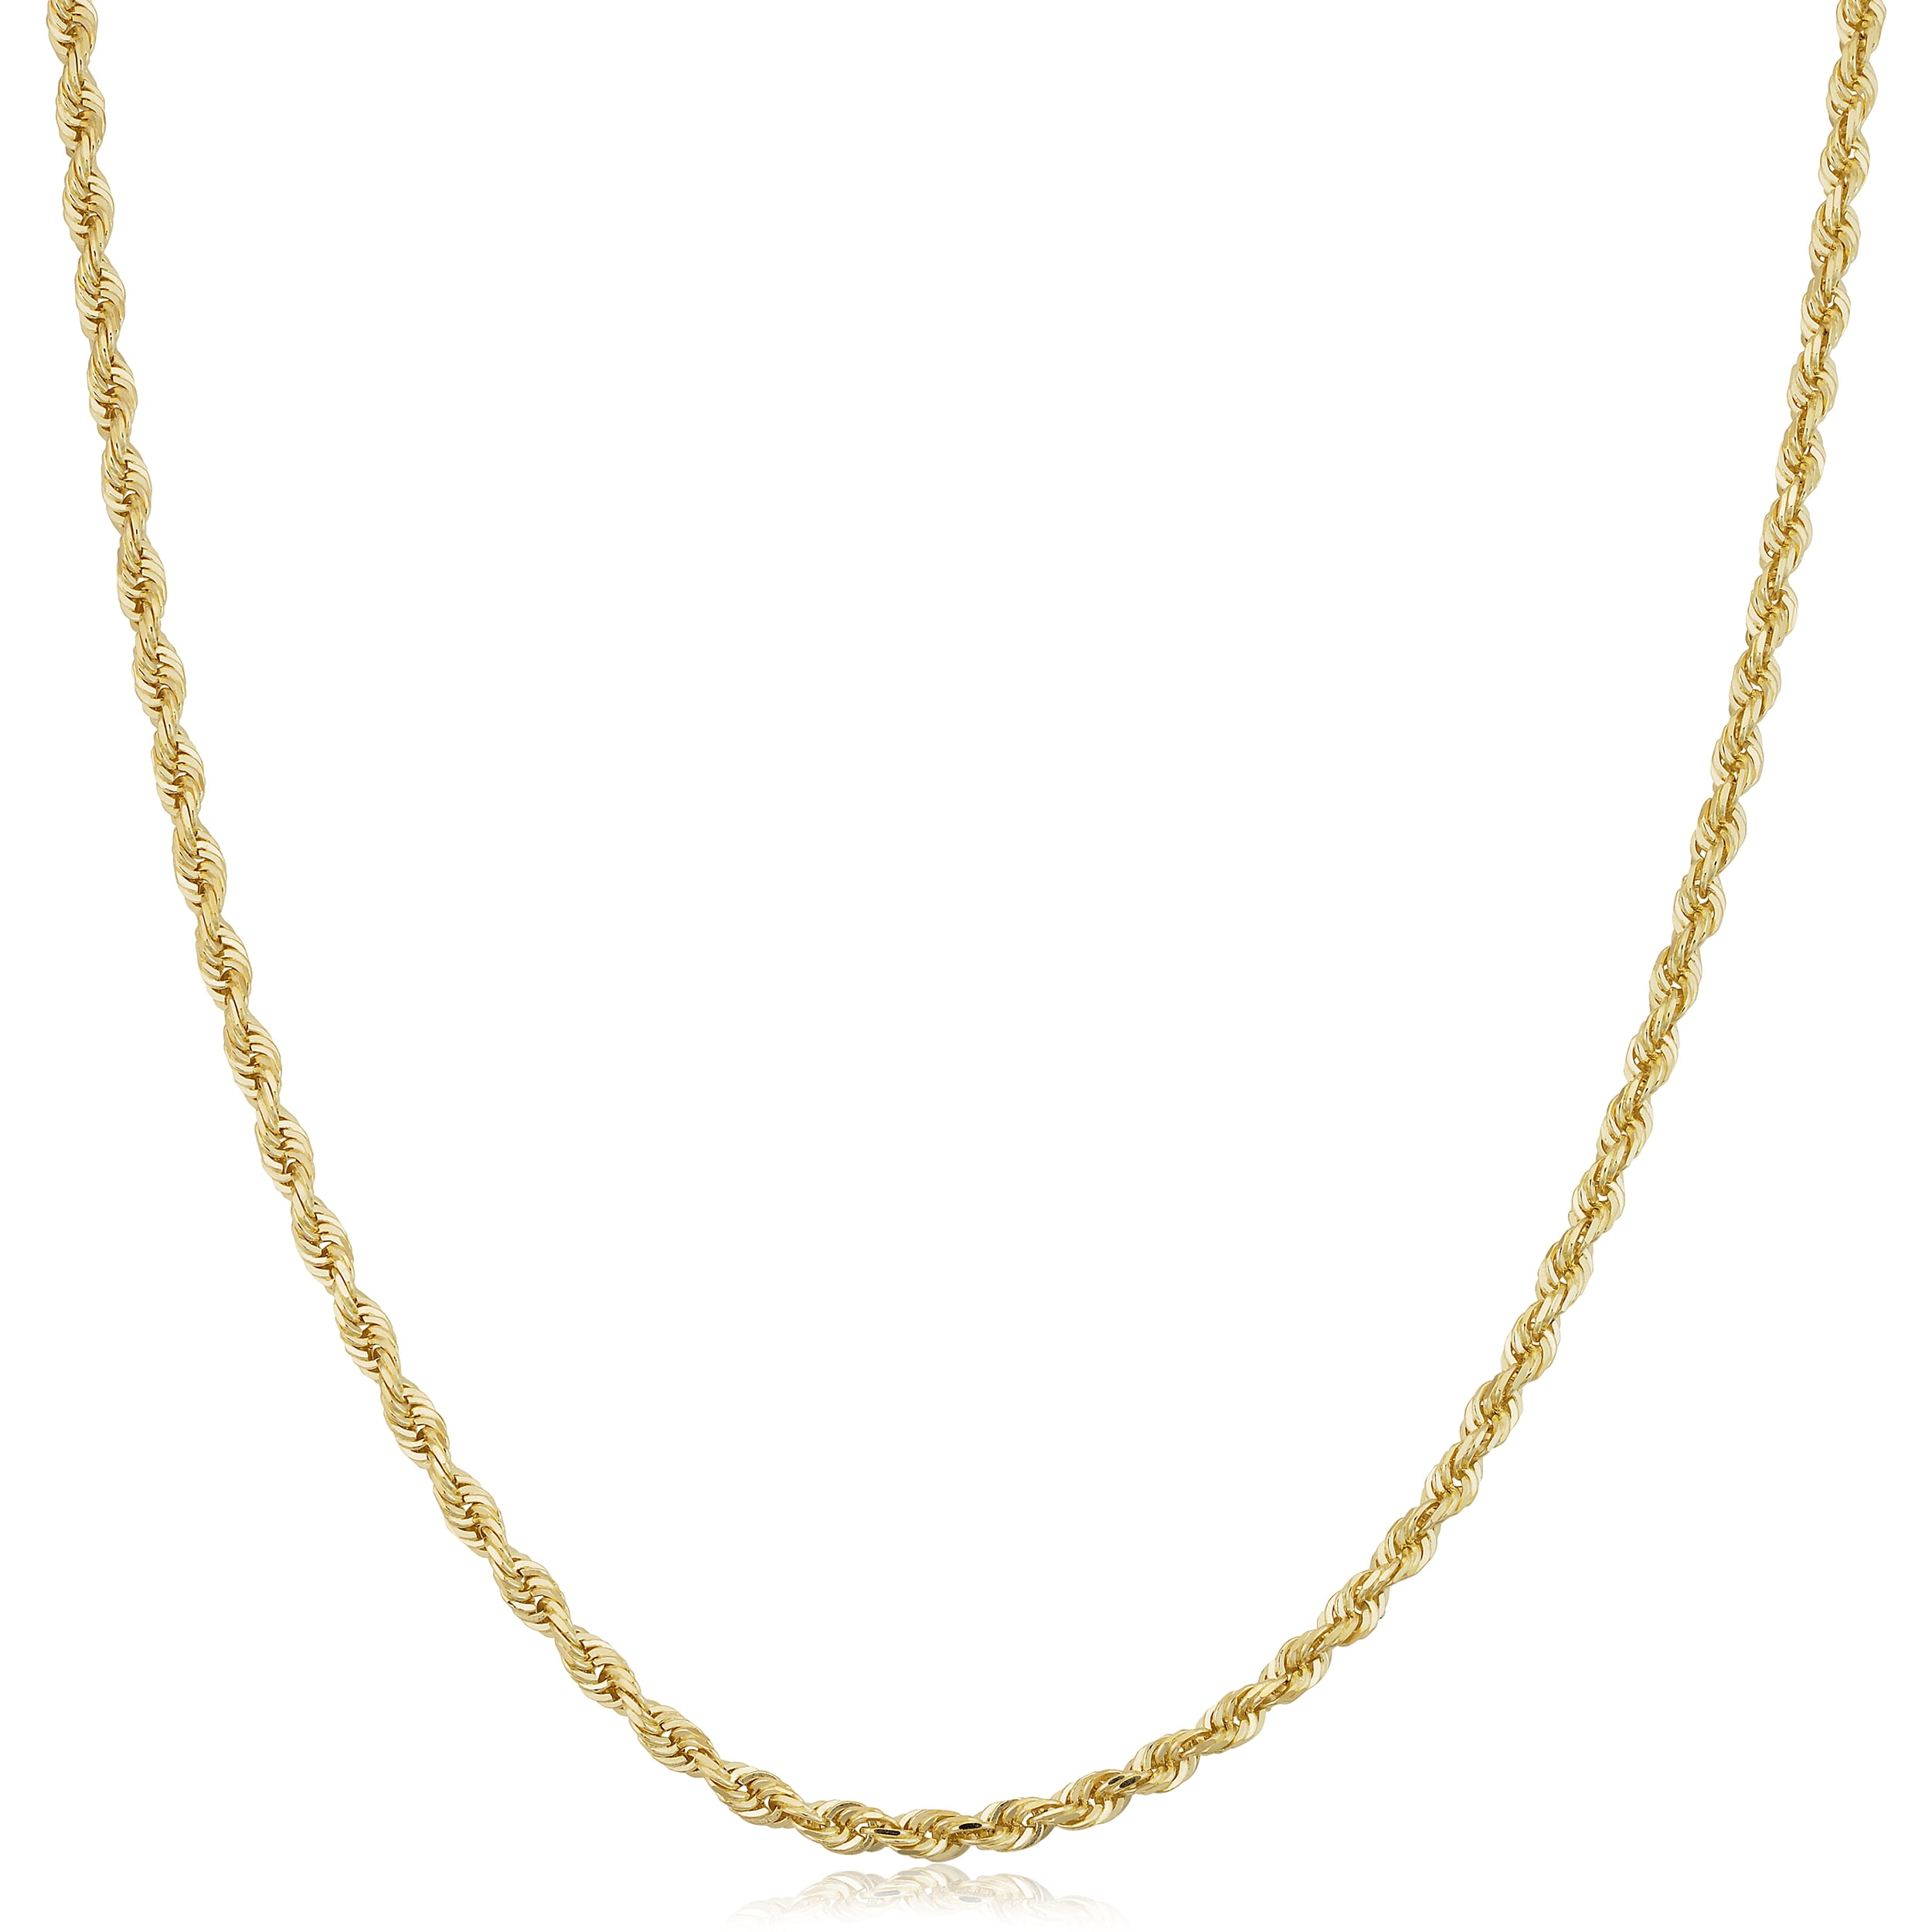 Men's 9.5mm 14k Yellow Gold Plated Flat Figaro Choker Chain Necklace, 20  inches - Walmart.com